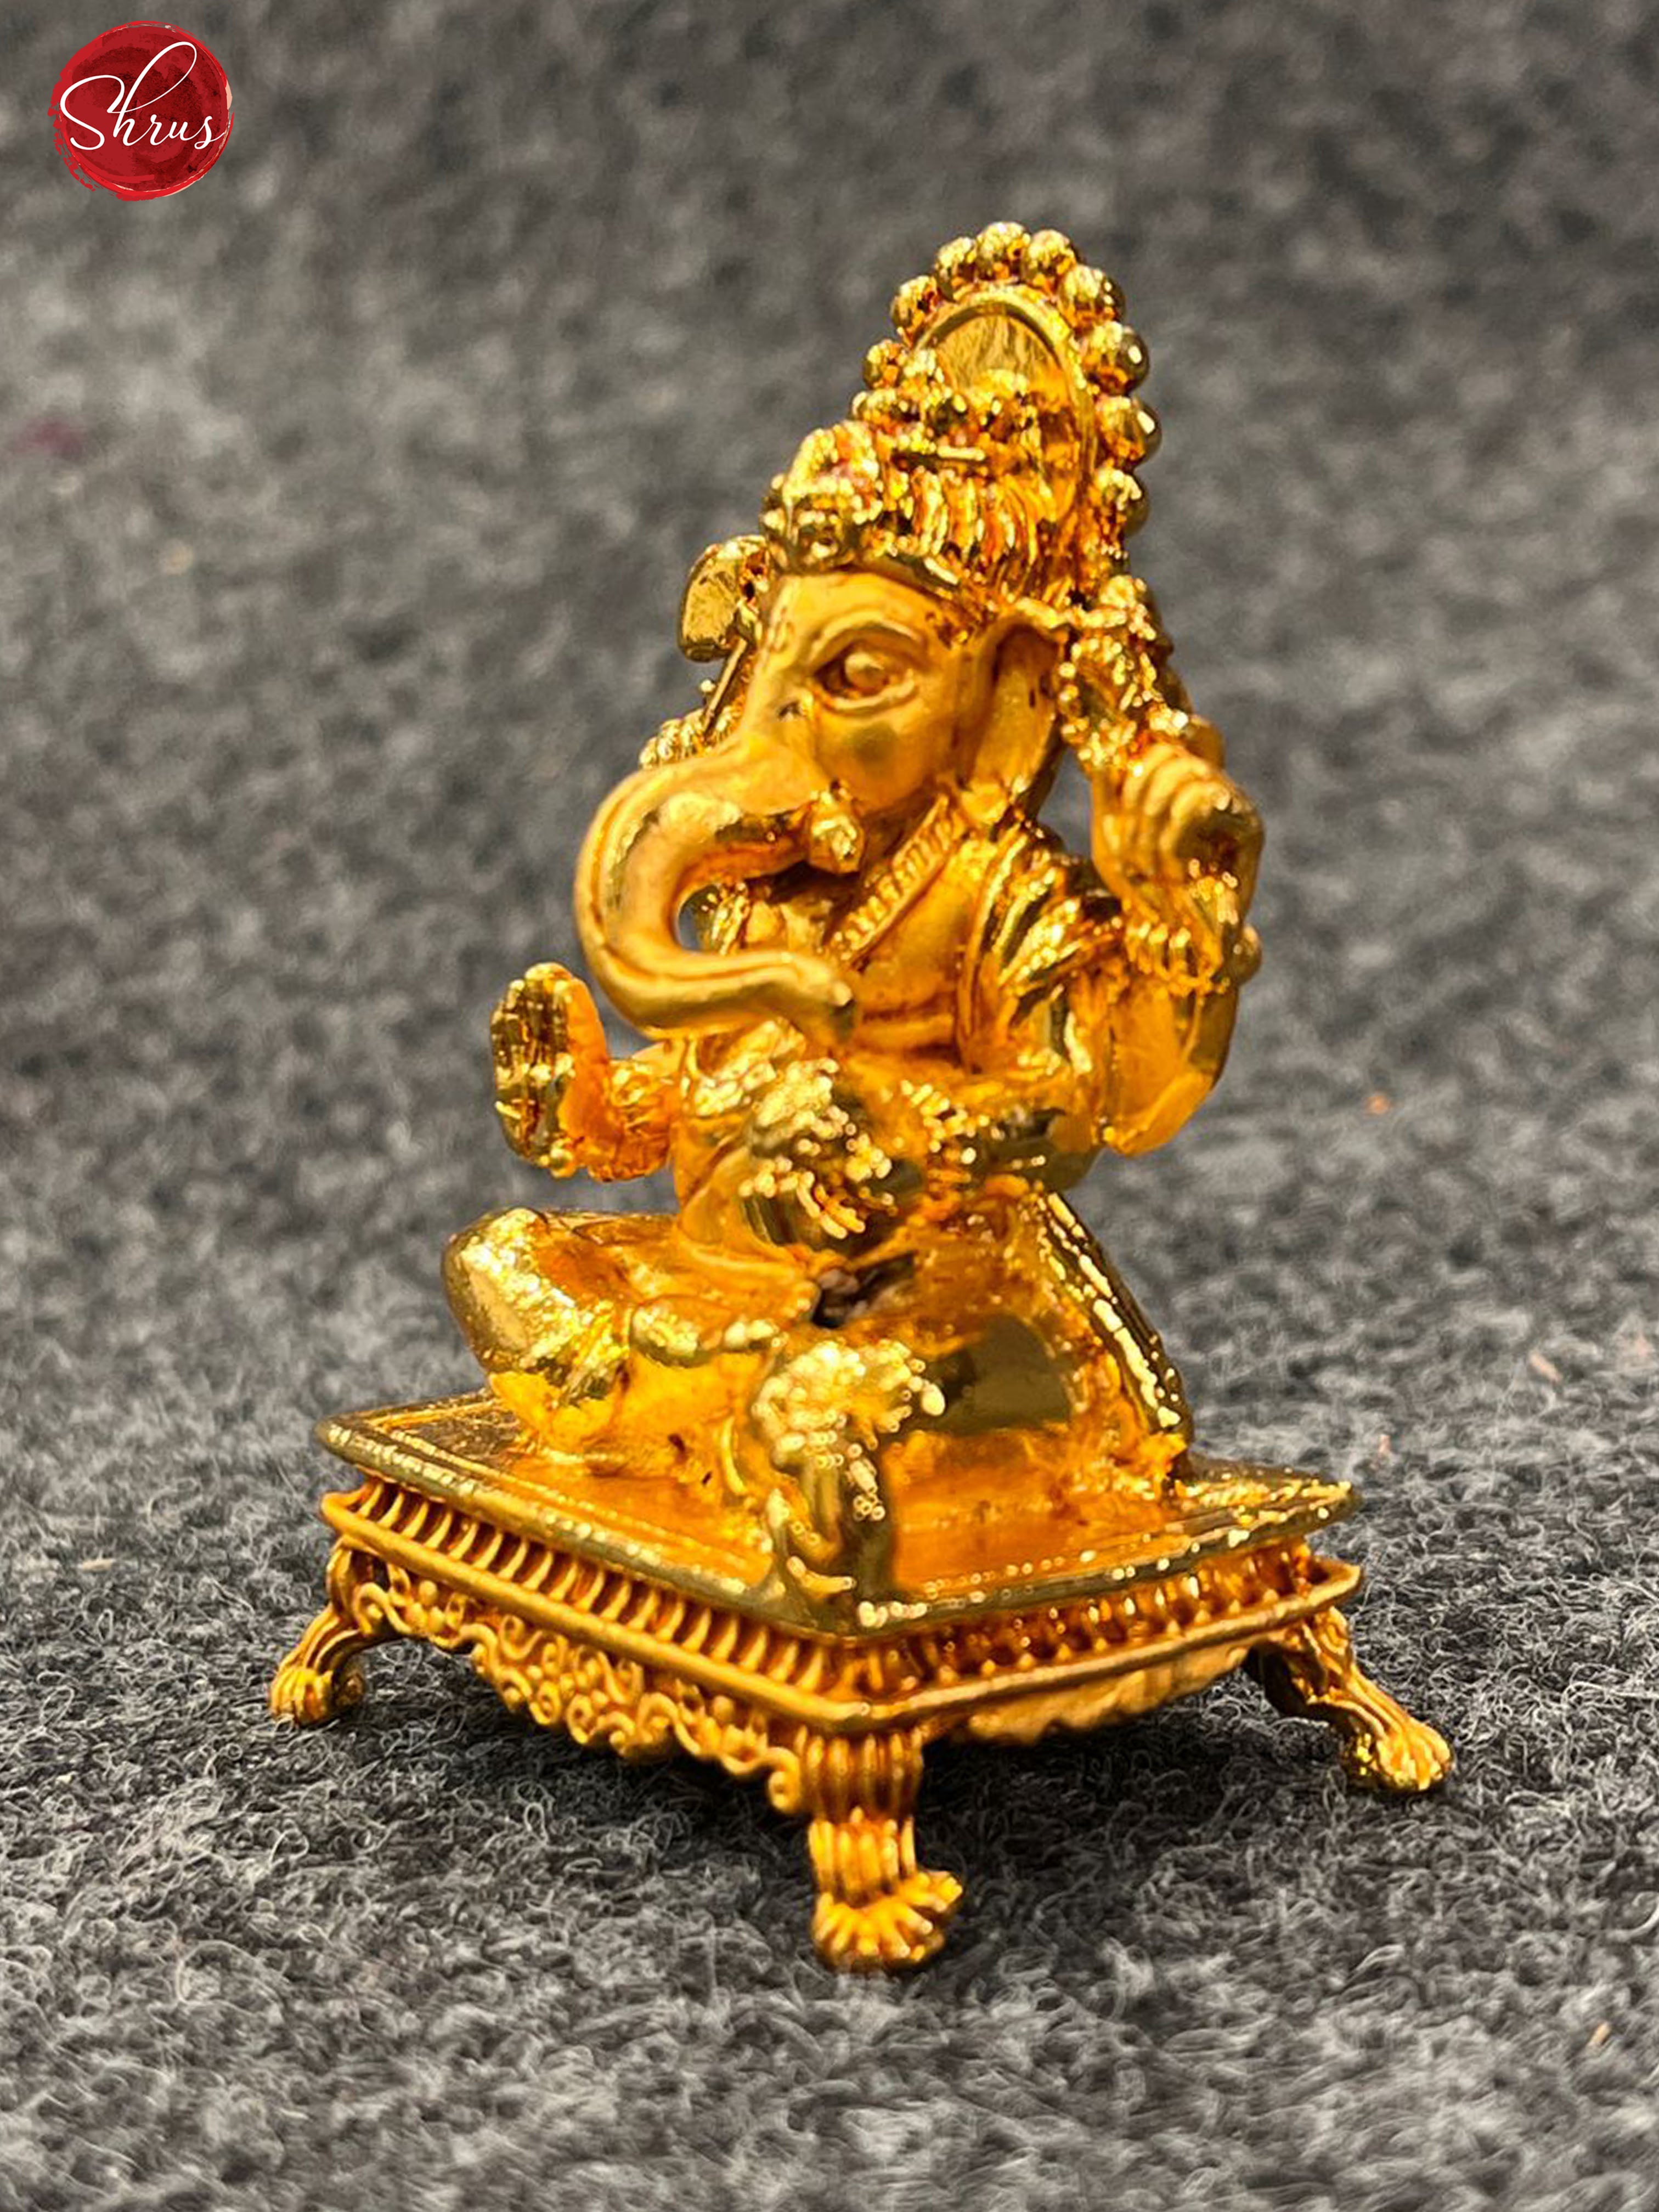 24 KT Gold Coated On Copper - Finely Crafted feature rich aadi Ganesha - Shop on ShrusEternity.com